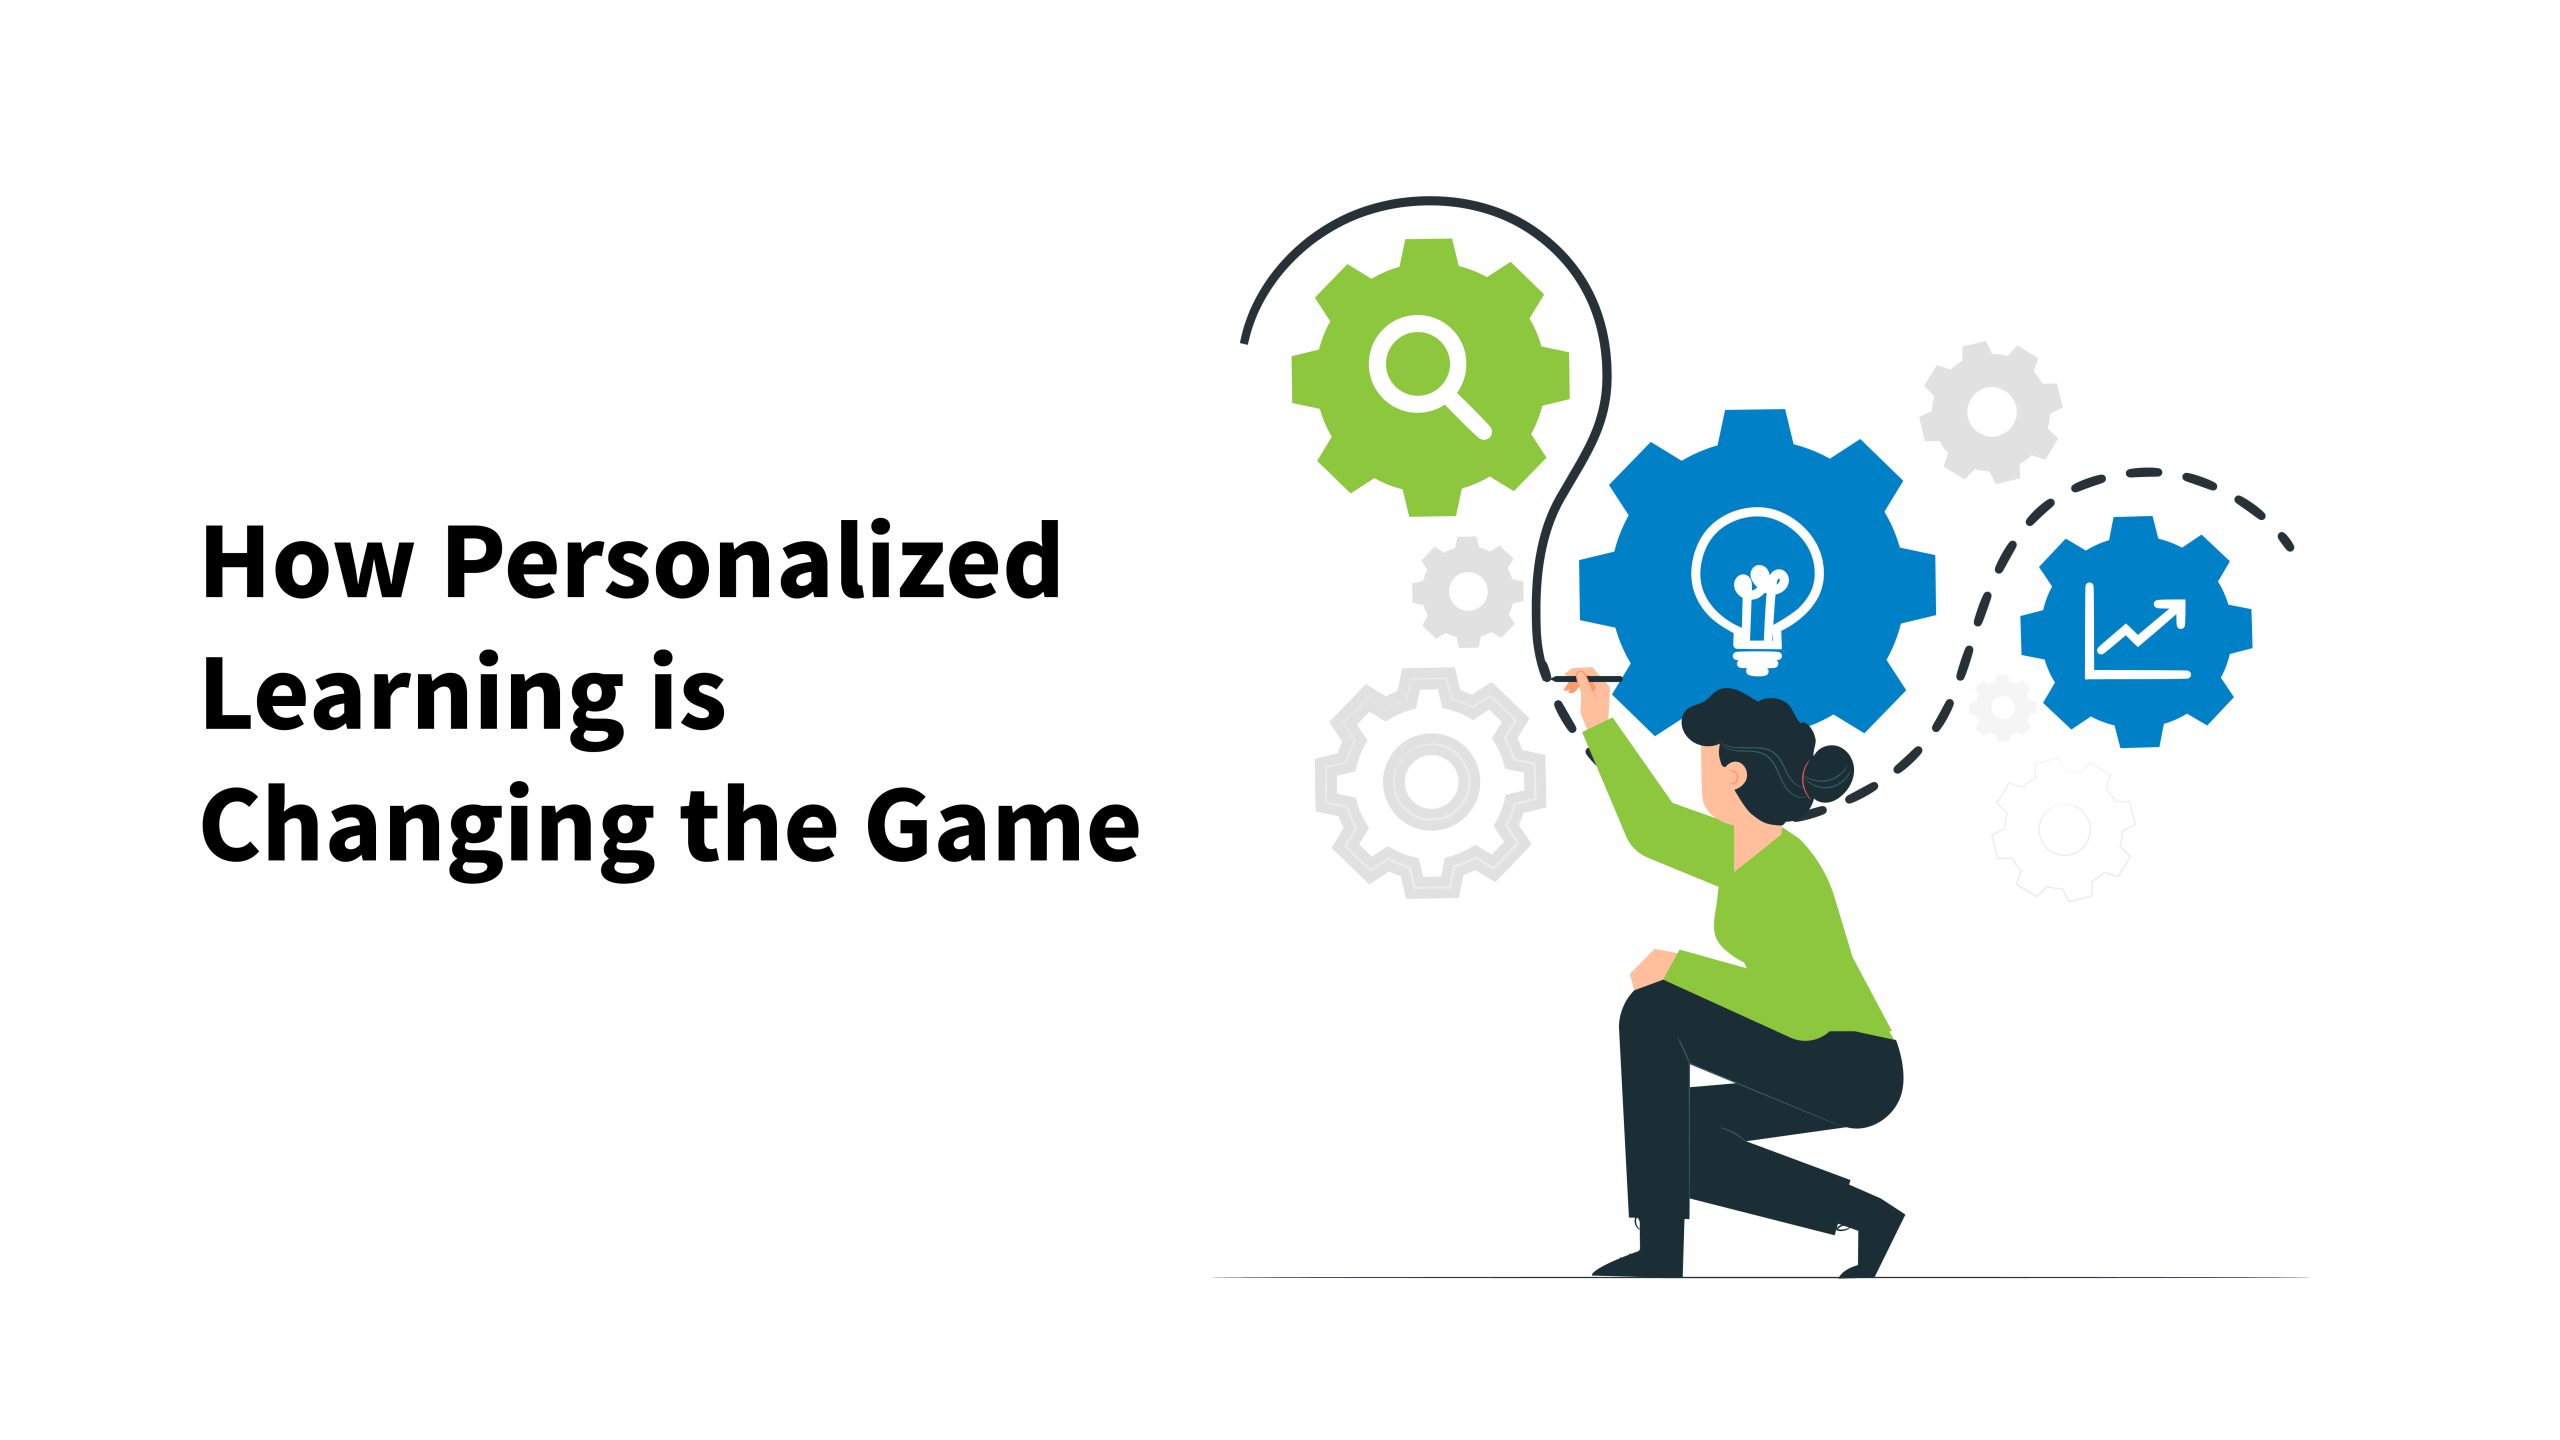 How Personalized Learning is Changing the Game